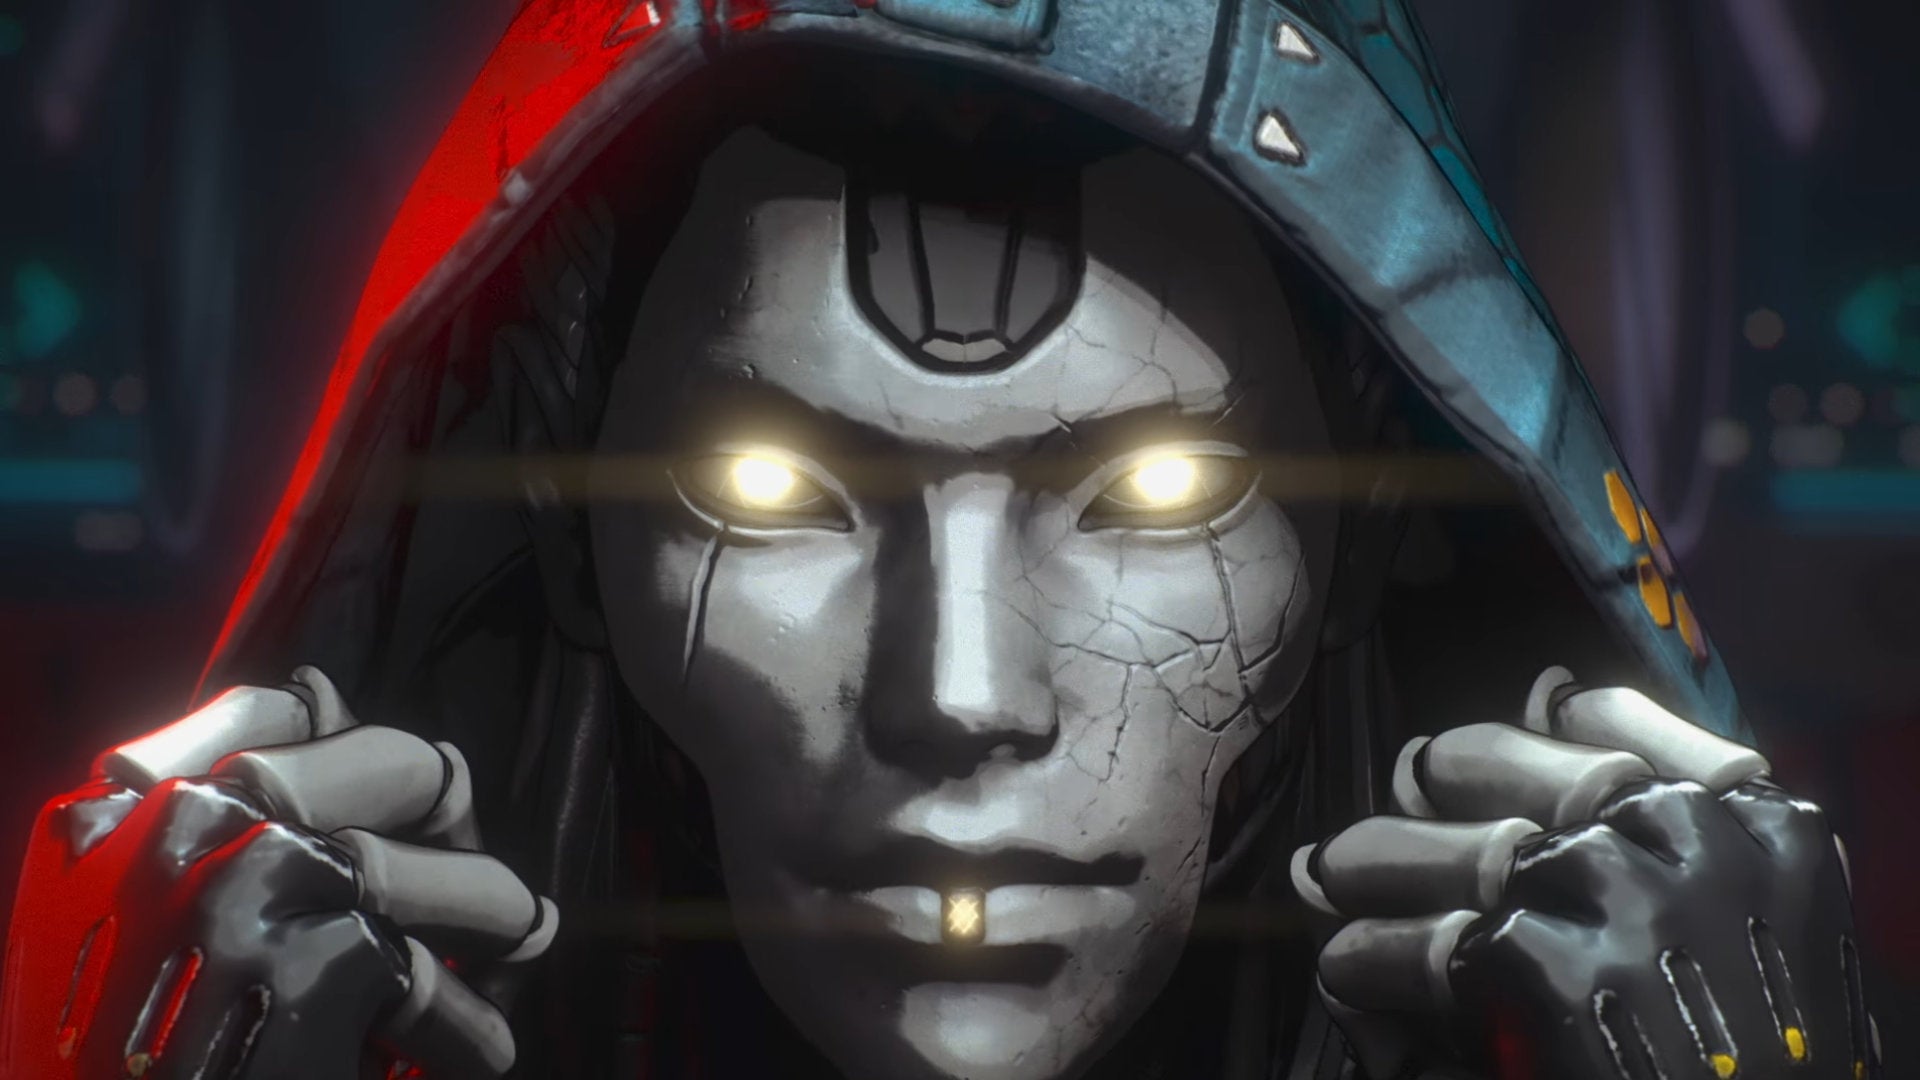 A close-up of Ash's face from an Apex Legends cinematic.